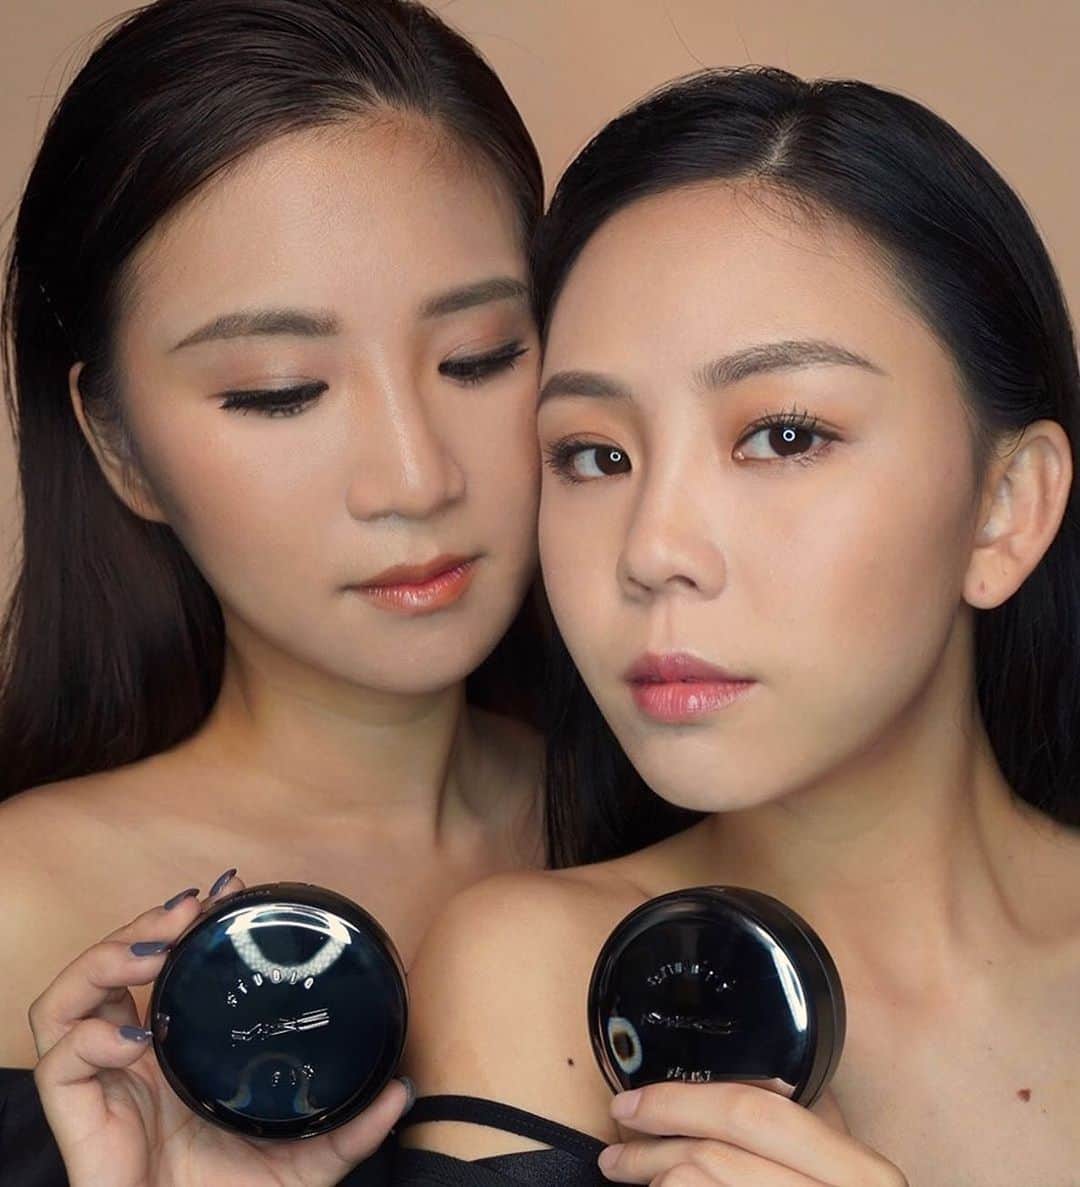 M·A·C Cosmetics Hong Kongさんのインスタグラム写真 - (M·A·C Cosmetics Hong KongInstagram)「隨身擁有✔貼薄遮瑕 ✔完美真實嘅底妝!  做最真實嘅自己，同時保持肌膚完美 - #霧鏡氣墊 帶俾你零破綻，不偽妝嘅#完美真我，自信度直線上升! 💯 想體驗NO.1 #霧鏡粉底 配方，立即Click IG Bio 嘅link登記換領體驗裝! Product mentioned:  Studio Fix Complete Coverage Cushion Compact SPF 50/PA++++ 無瑕霧鏡氣墊粉底SPF 50/PA++++ - HK$340 #MACStudio #MACHongKong Regram: @mua_ctma  With our ALL NEW Studio Fix Complete Coverage Cushion, looking flawless has never been easier! ✔ Skin-like Texture ✔Perfect Coverage ✔24-Hour Wear Exclusive for Asia, Skin Balancing Complex formula controls excessive oil while boosting skin moisturization. Come experience a flawless, yet breathable skin at M·A·C stores near you!  Click link in bio to sign up to sample the NO.1 #StudioFixFluid now.」9月4日 10時06分 - maccosmeticshk